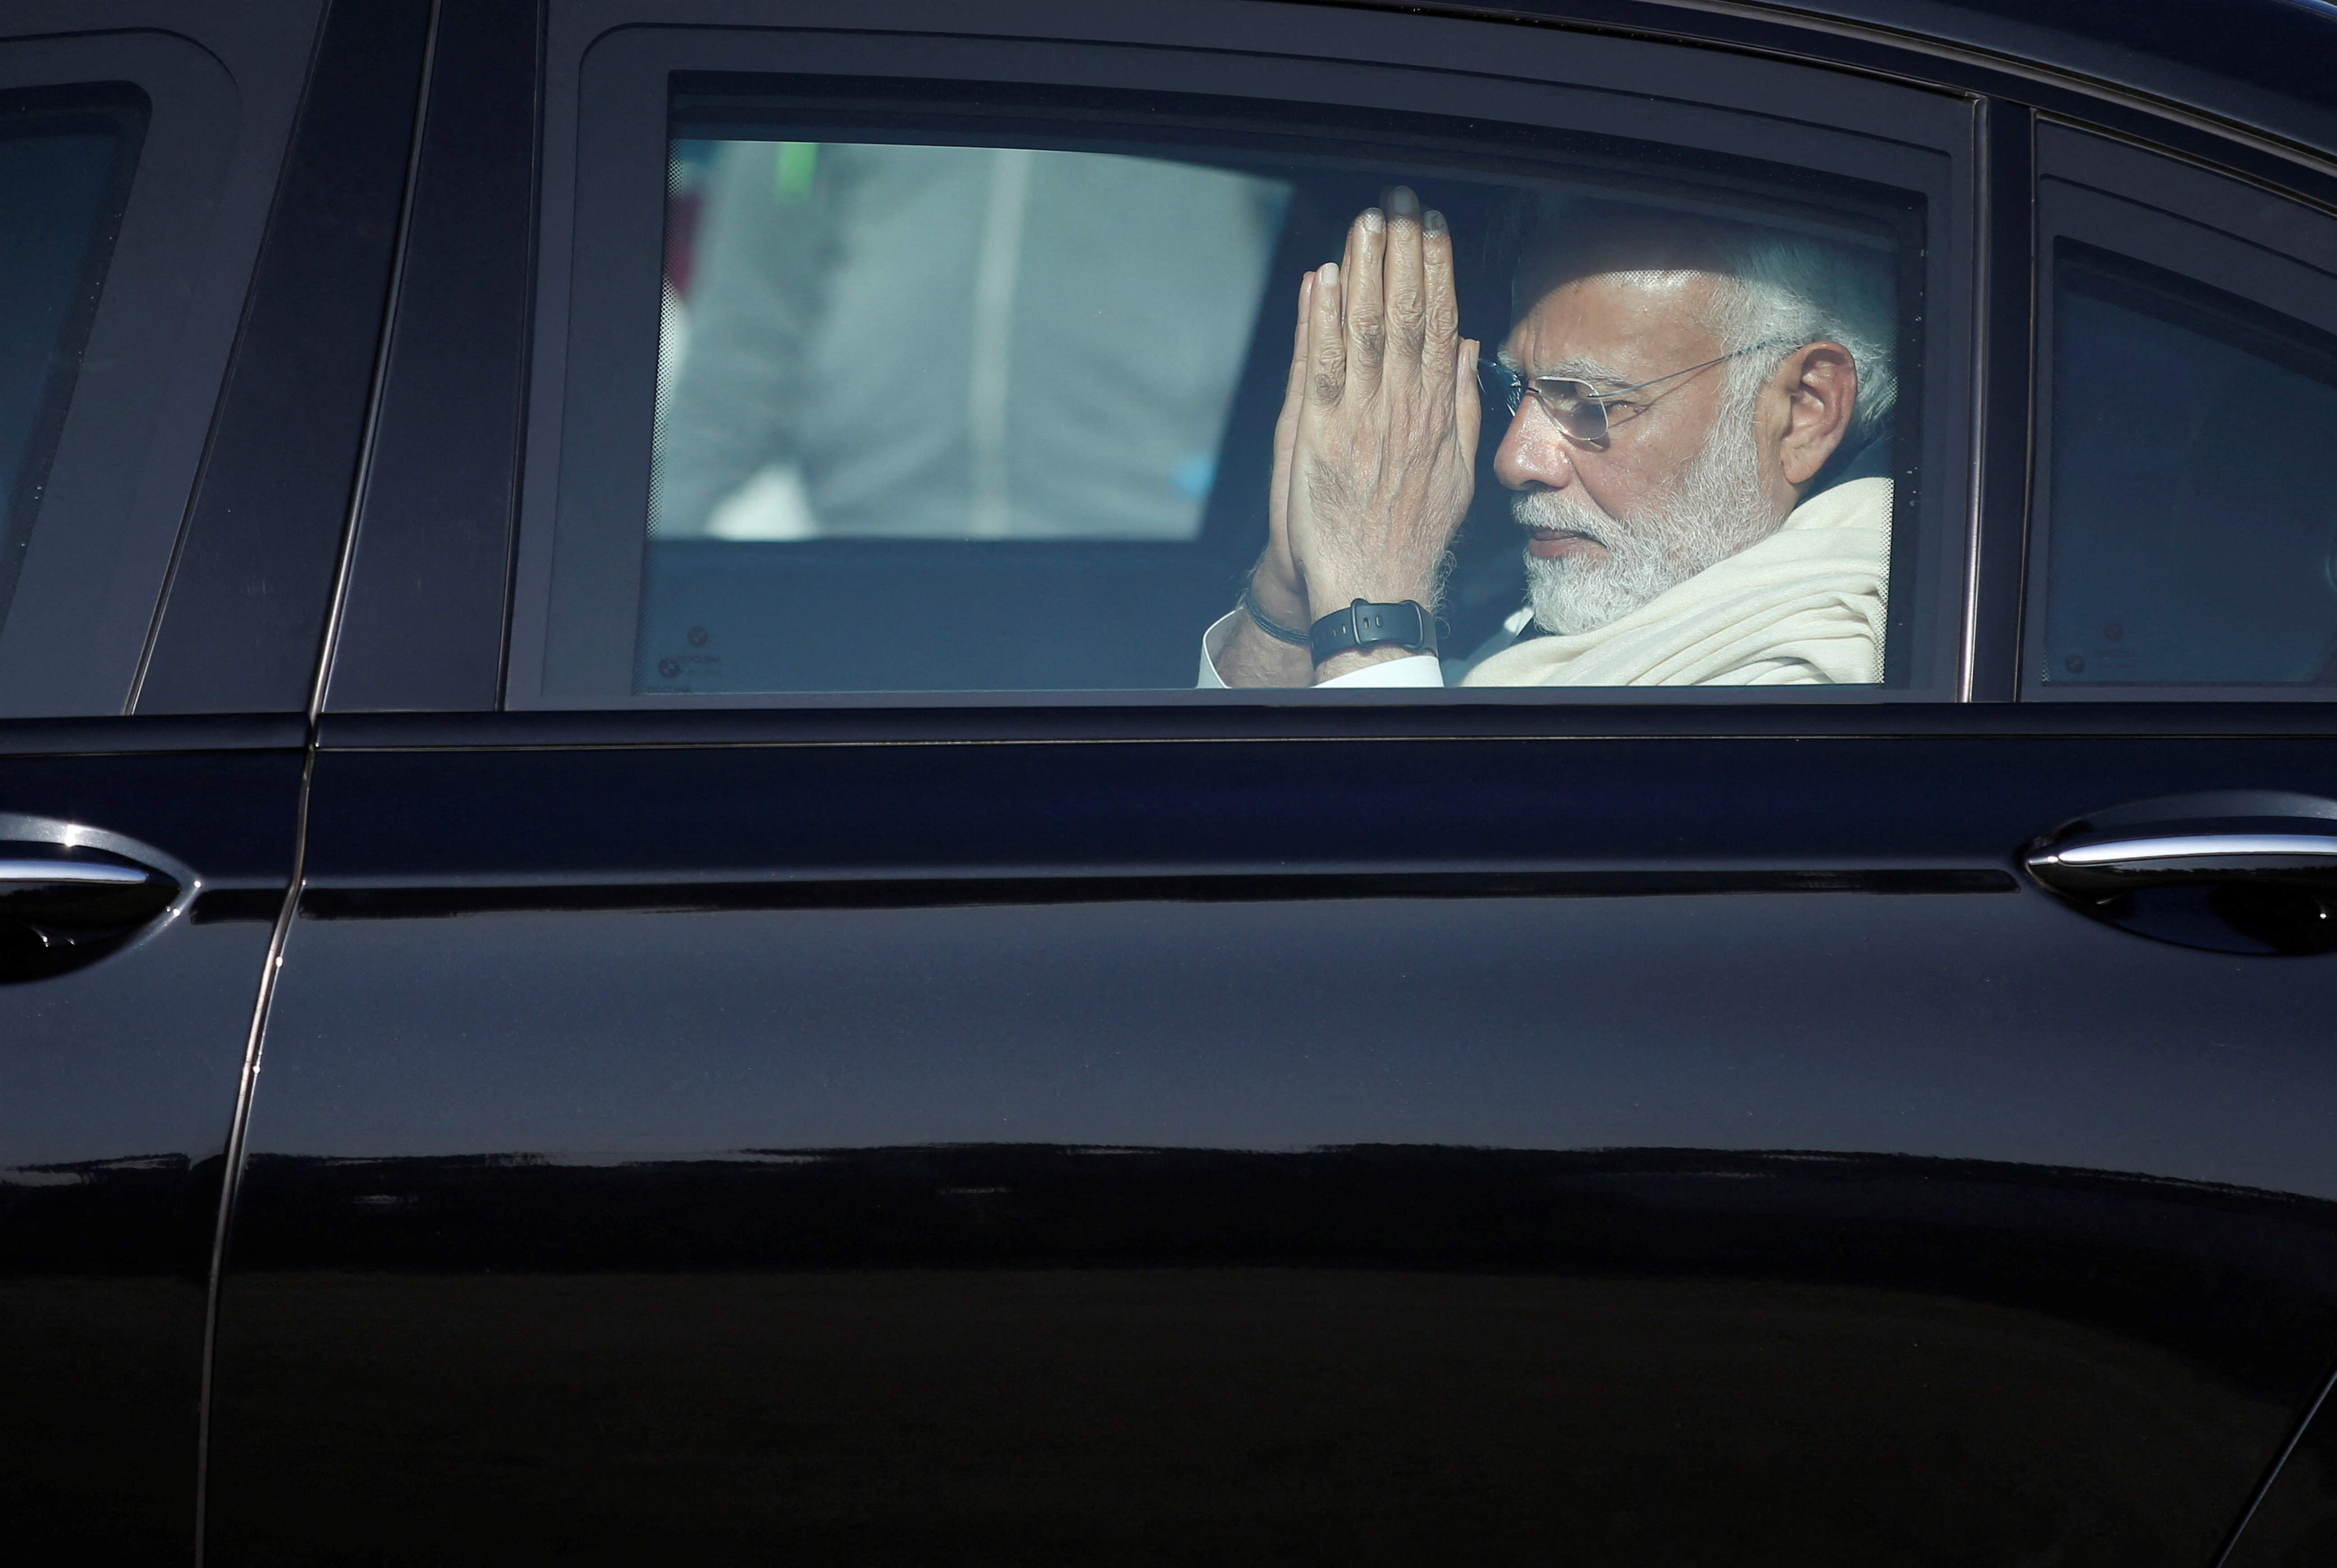 Indian Prime Minister Narendra Modi gestures as he leaves in a car after attending the funeral of his mother Heeraben, in Gandhinagar